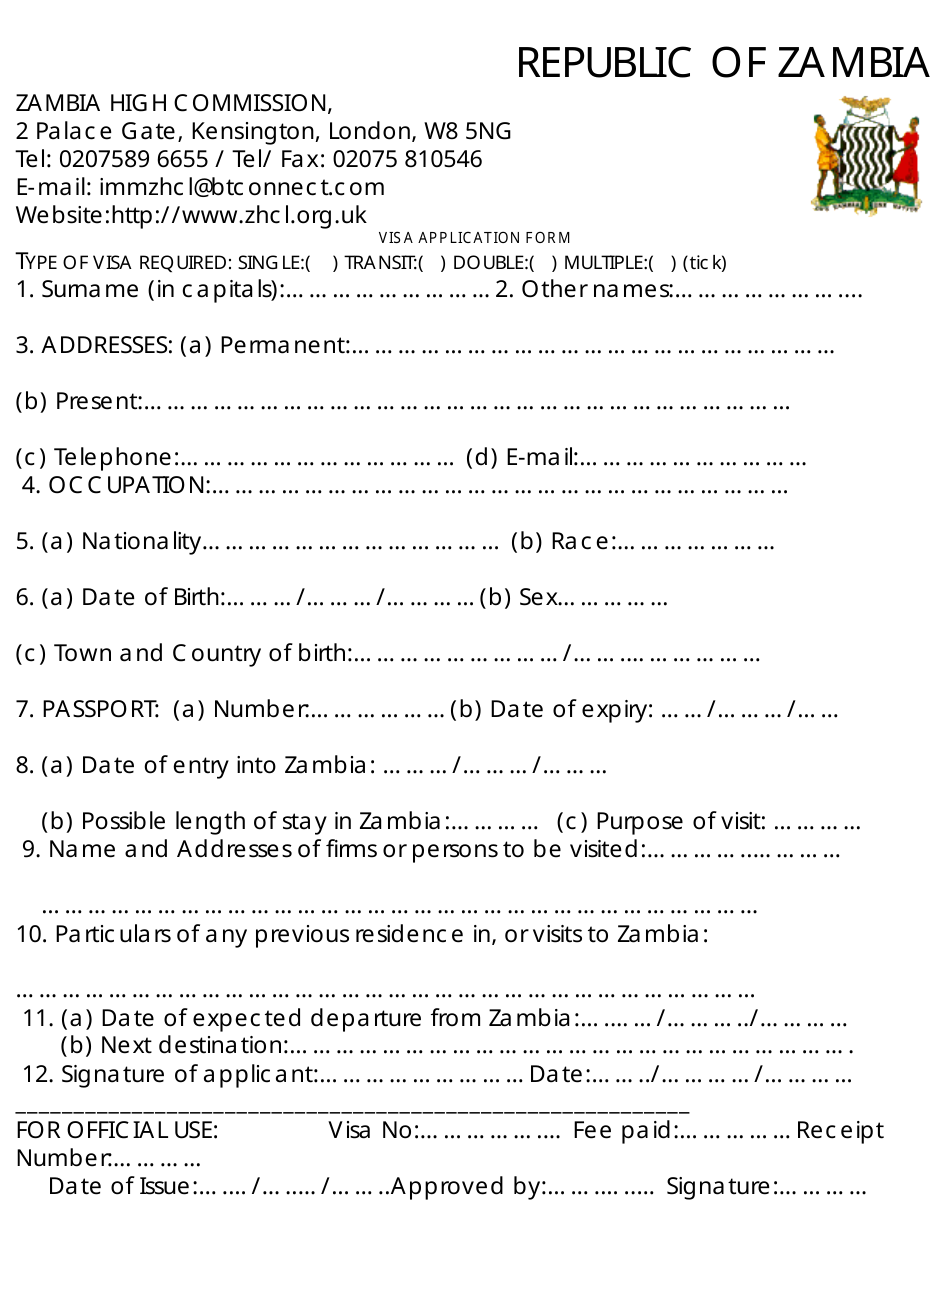 Zambia Visa Application Form - Zambia High Commission - City of London, Greater London, United Kingdom, Page 1